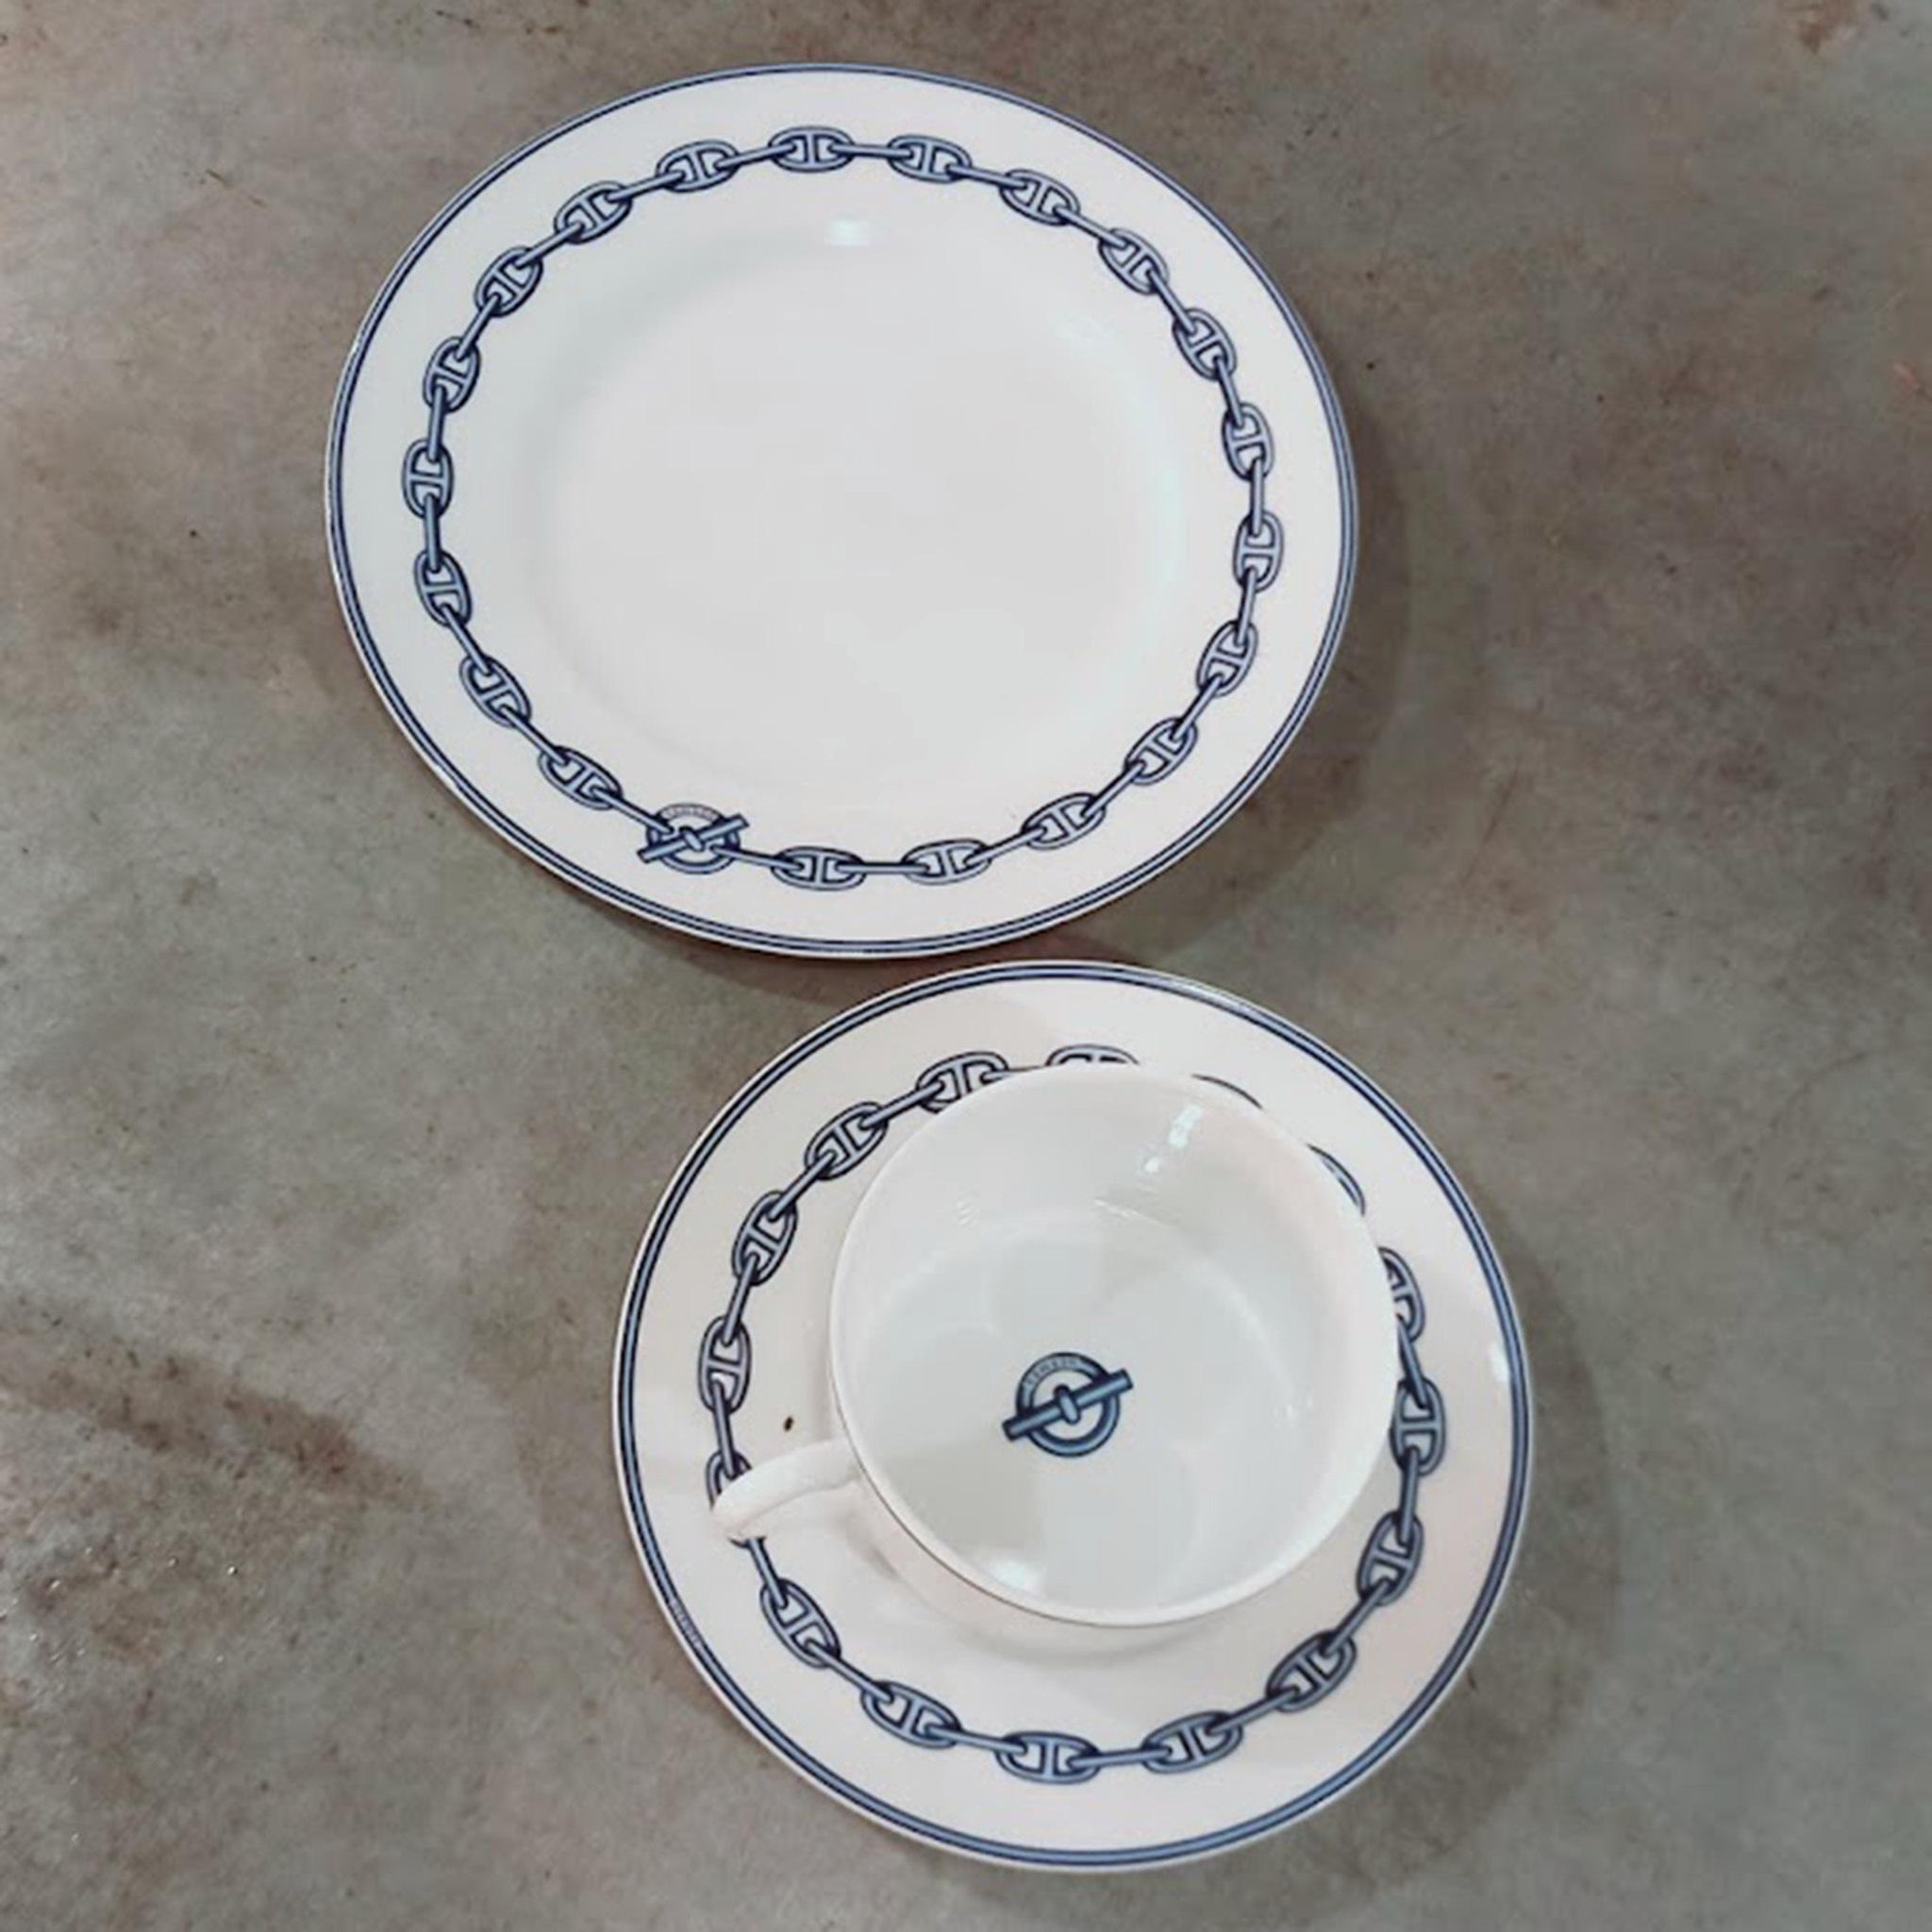 A porcelain breakfast cup (34 cl), saucer and side plate setting in the Chaine d'Ancre pattern in grey by Hermès. Signed, made in France, and produced from 1997-2017.

Hermès' signature chain link as a border against pristine white porcelain.